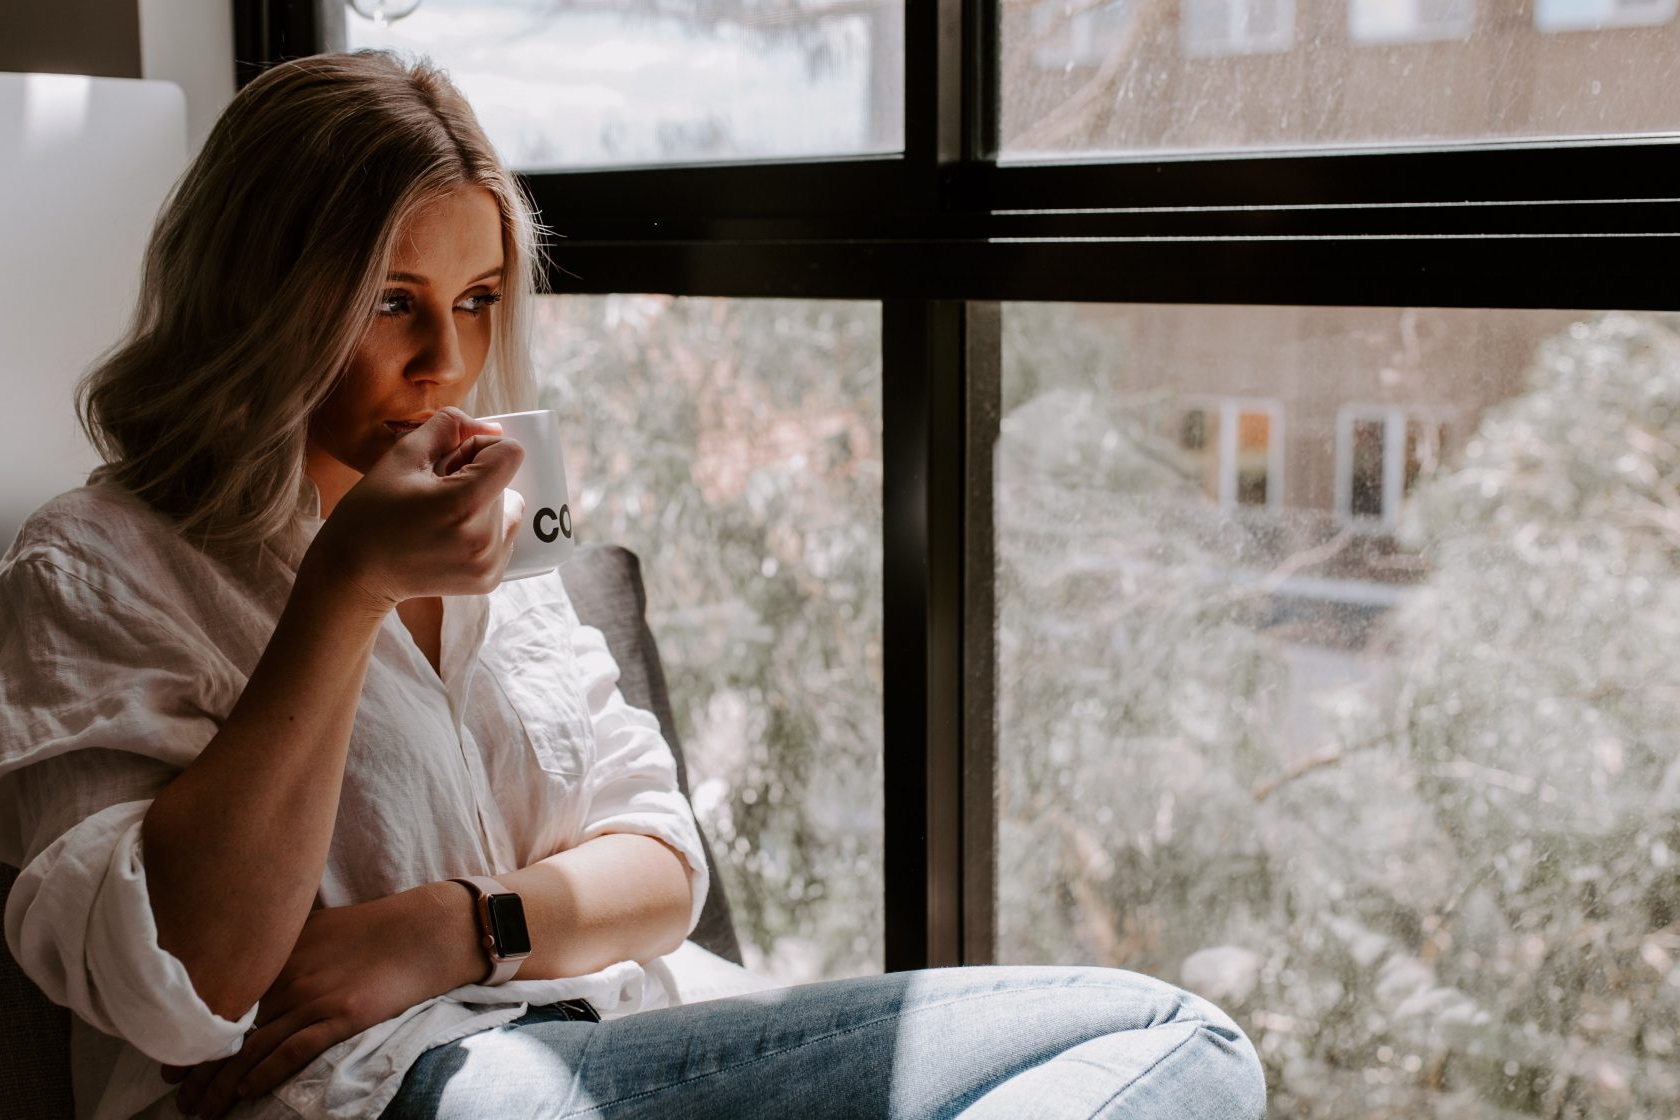 15 signs you’re a “good kind of introvert” and you don’t need to change at all